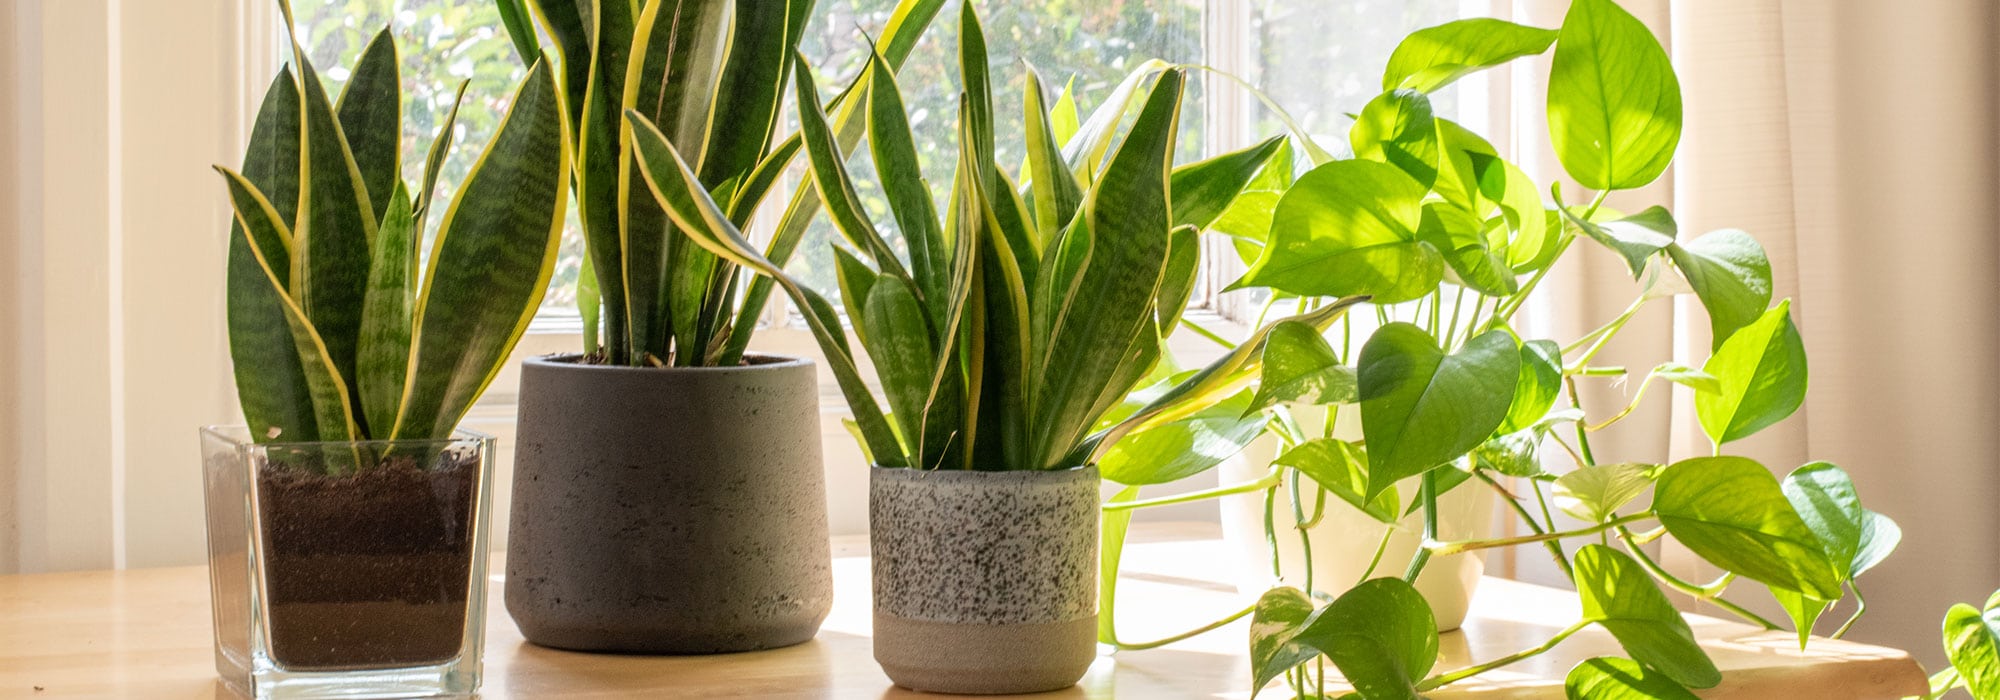 Best Indoor Plants for Excellent Home Air Quality - Airrific